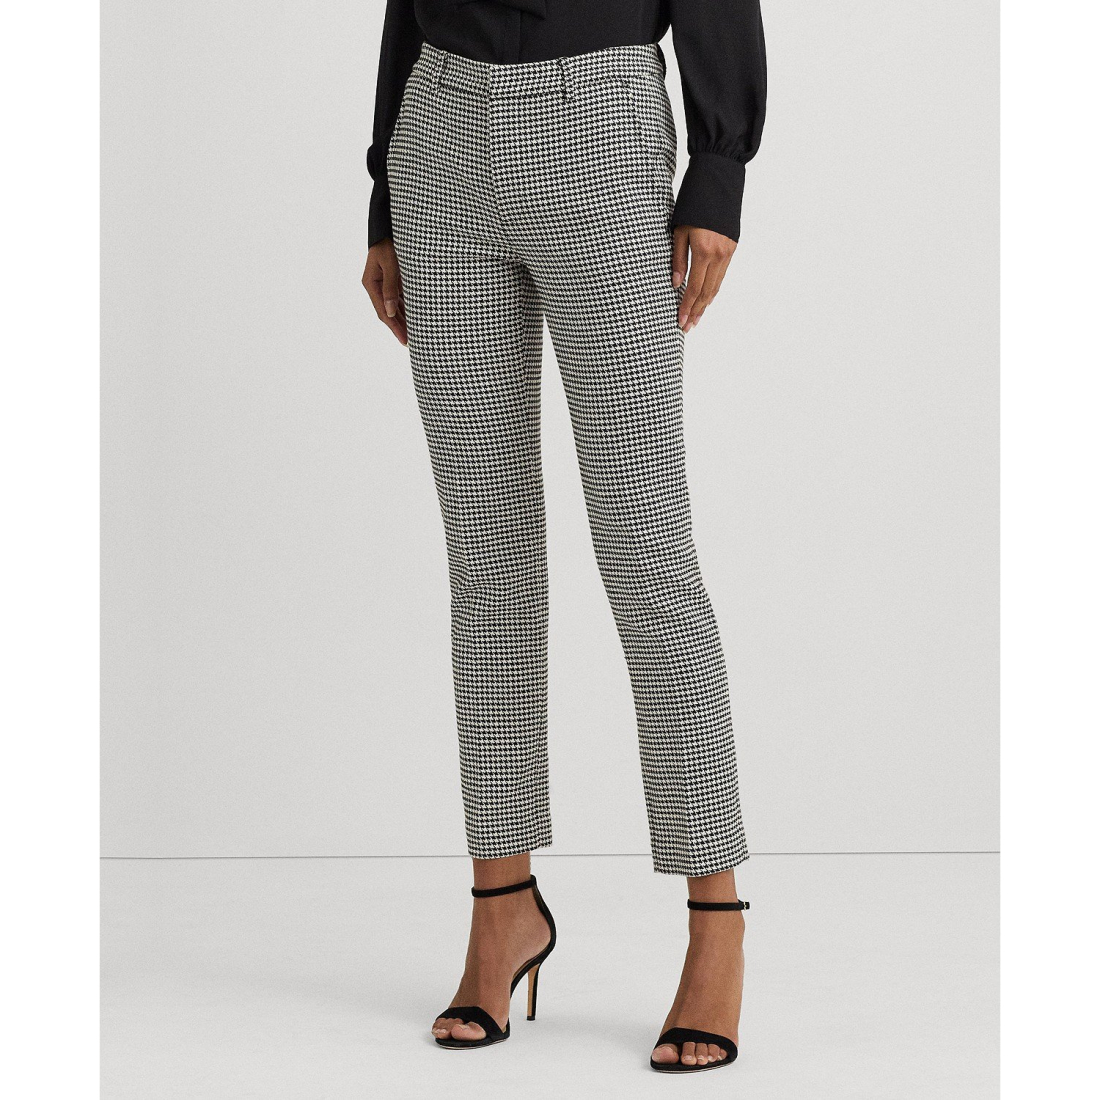 Women's 'Slim Houndstooth' Trousers